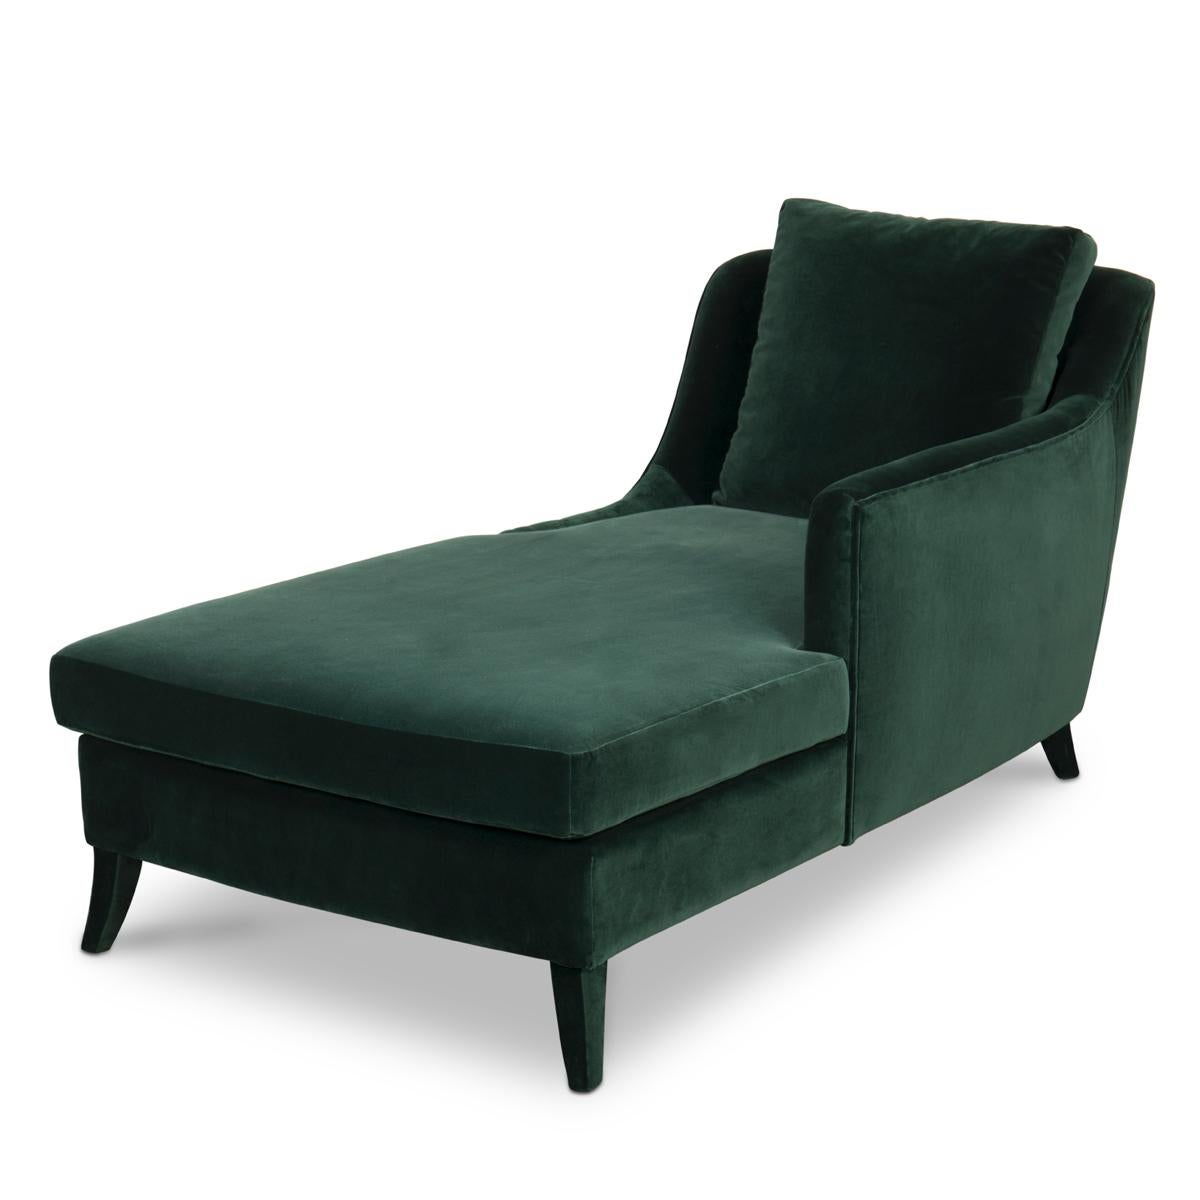 Long chair British green with solid wood structure
and covered with cotton velvet fabric. Fully upholstery
long chair. Also available in British green armchair.
 